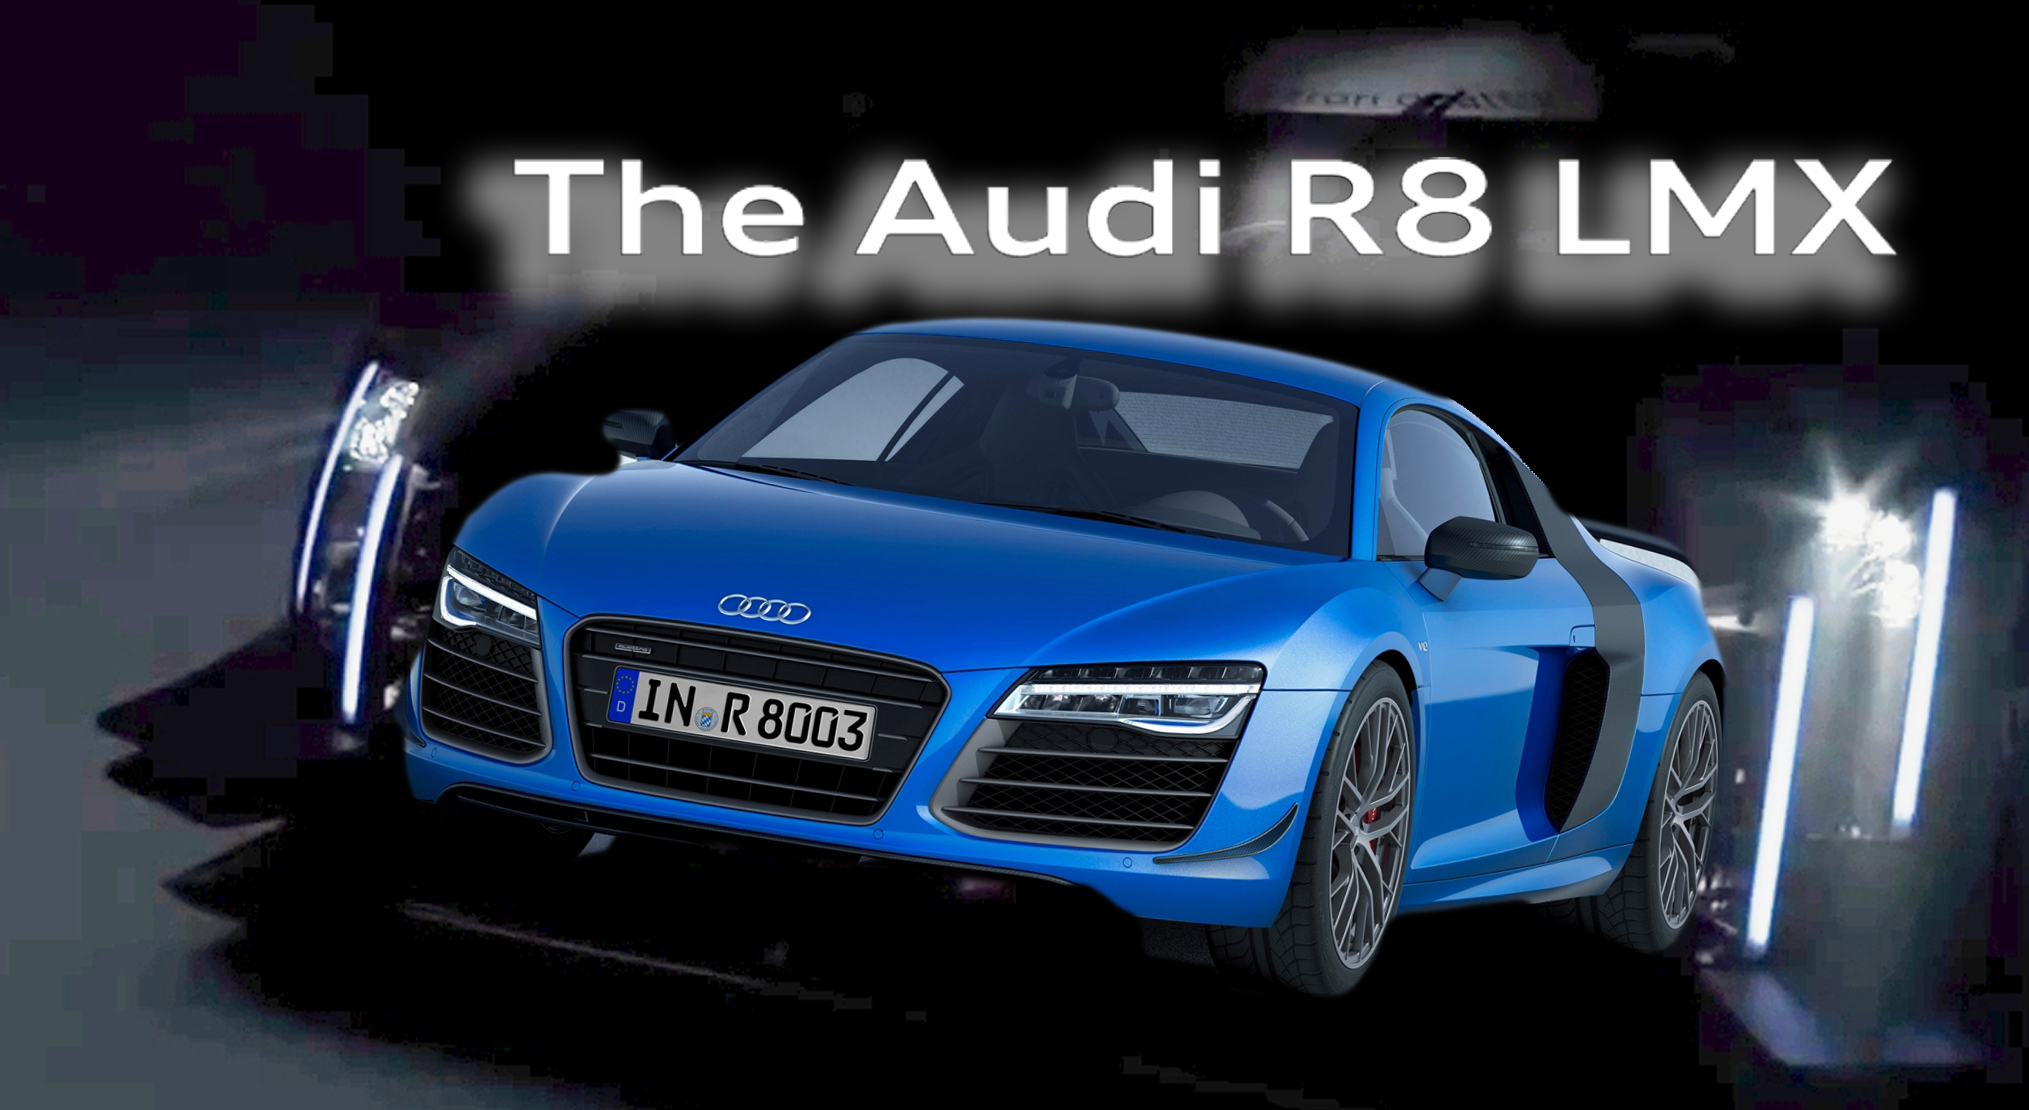 Audi R8 LMX HD background for Phone 2015 Wallpaper Cars 72646 high